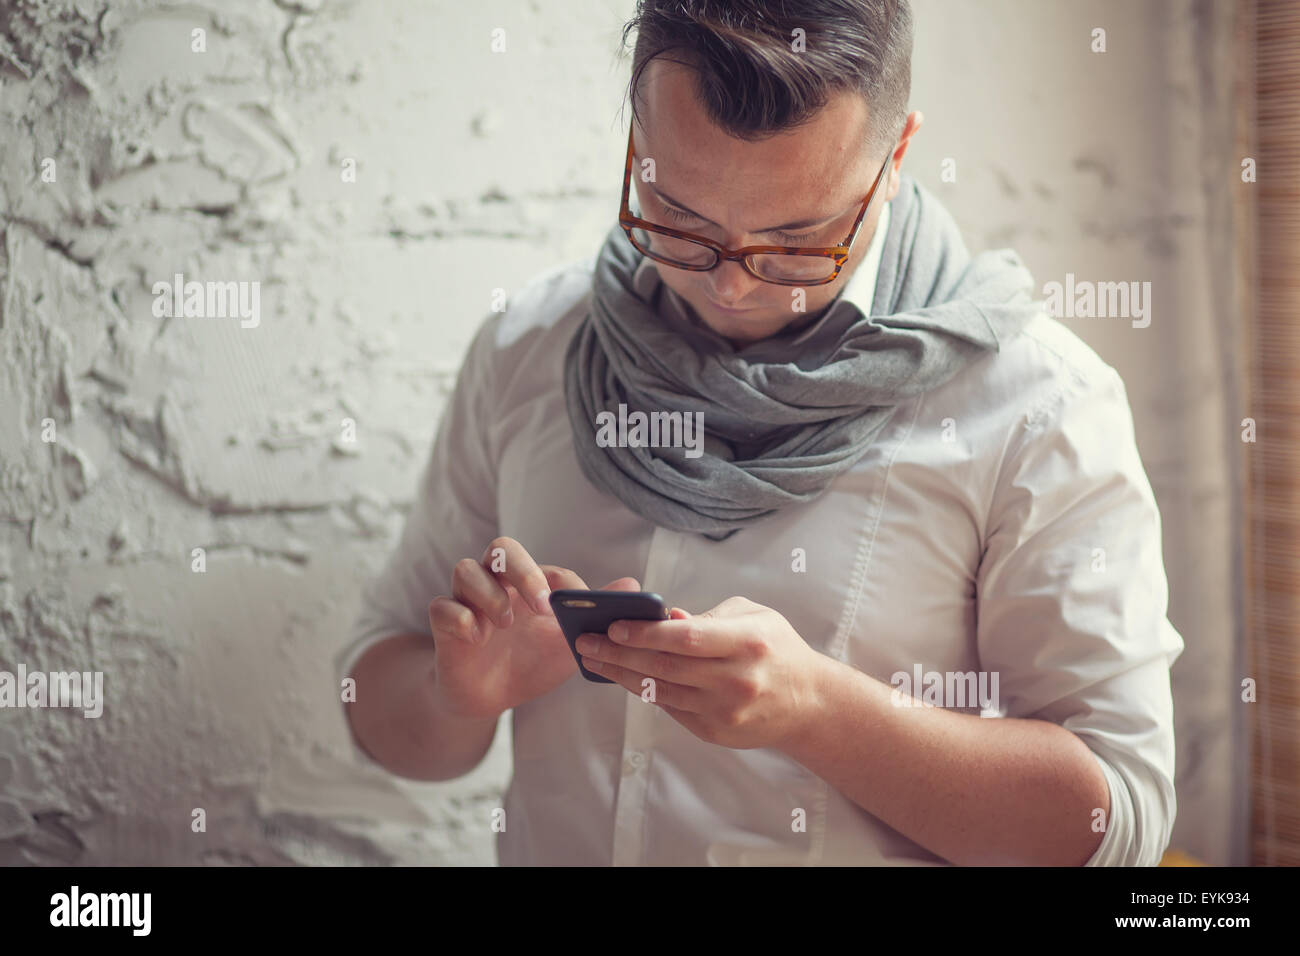 Trendy man working in startup office Stock Photo